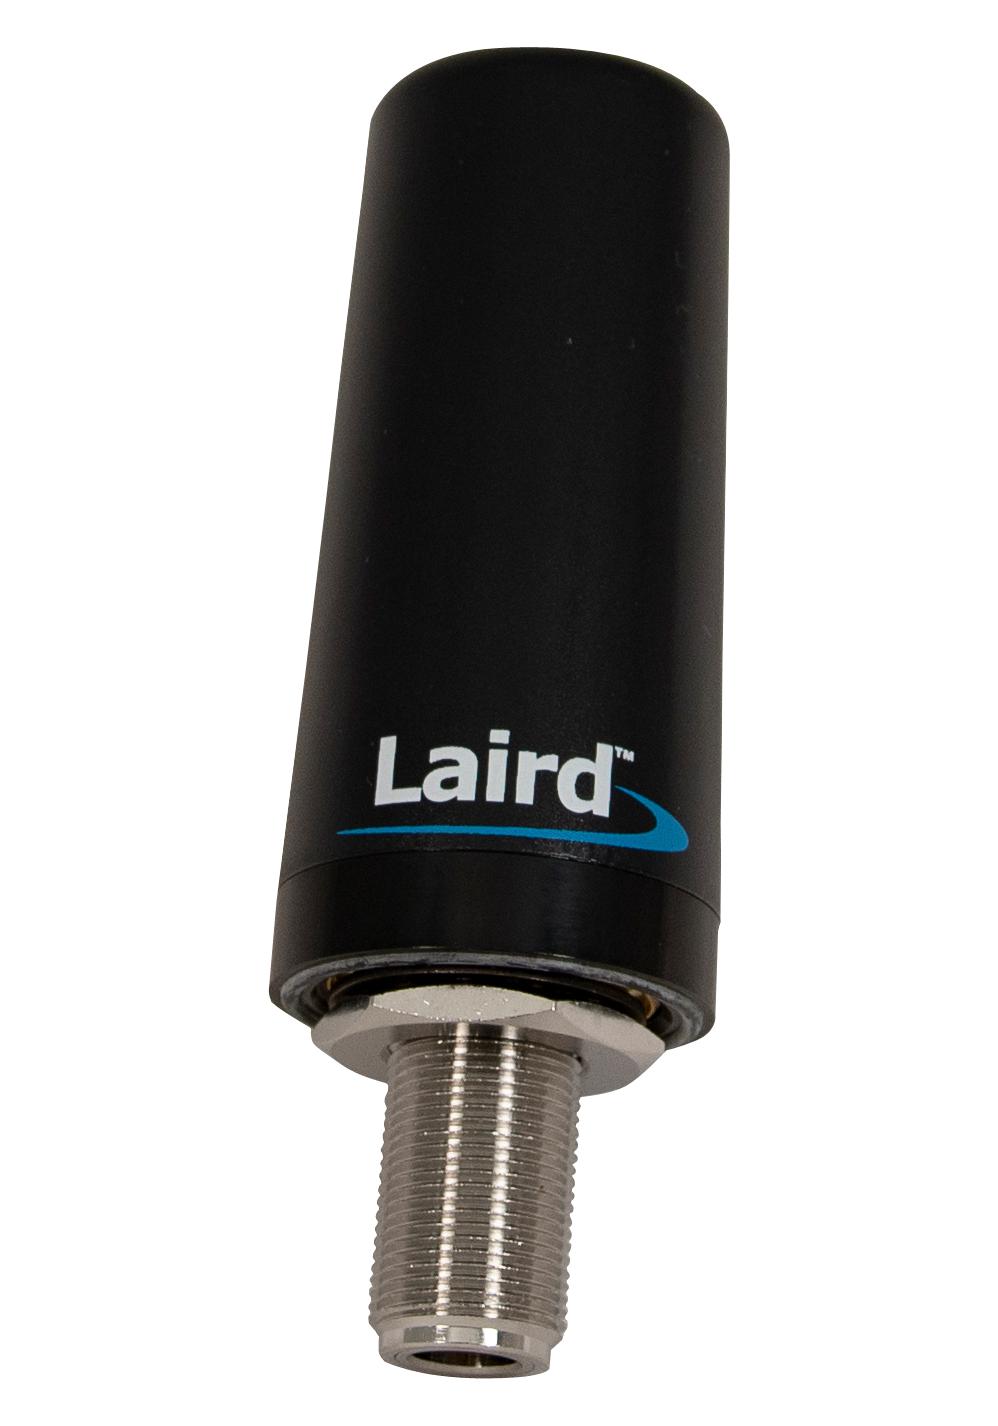 TRA6927M3PB-001 DOME ANTENNA, 1.71-2.7GHZ, 4.6DBI LAIRD CONNECTIVITY